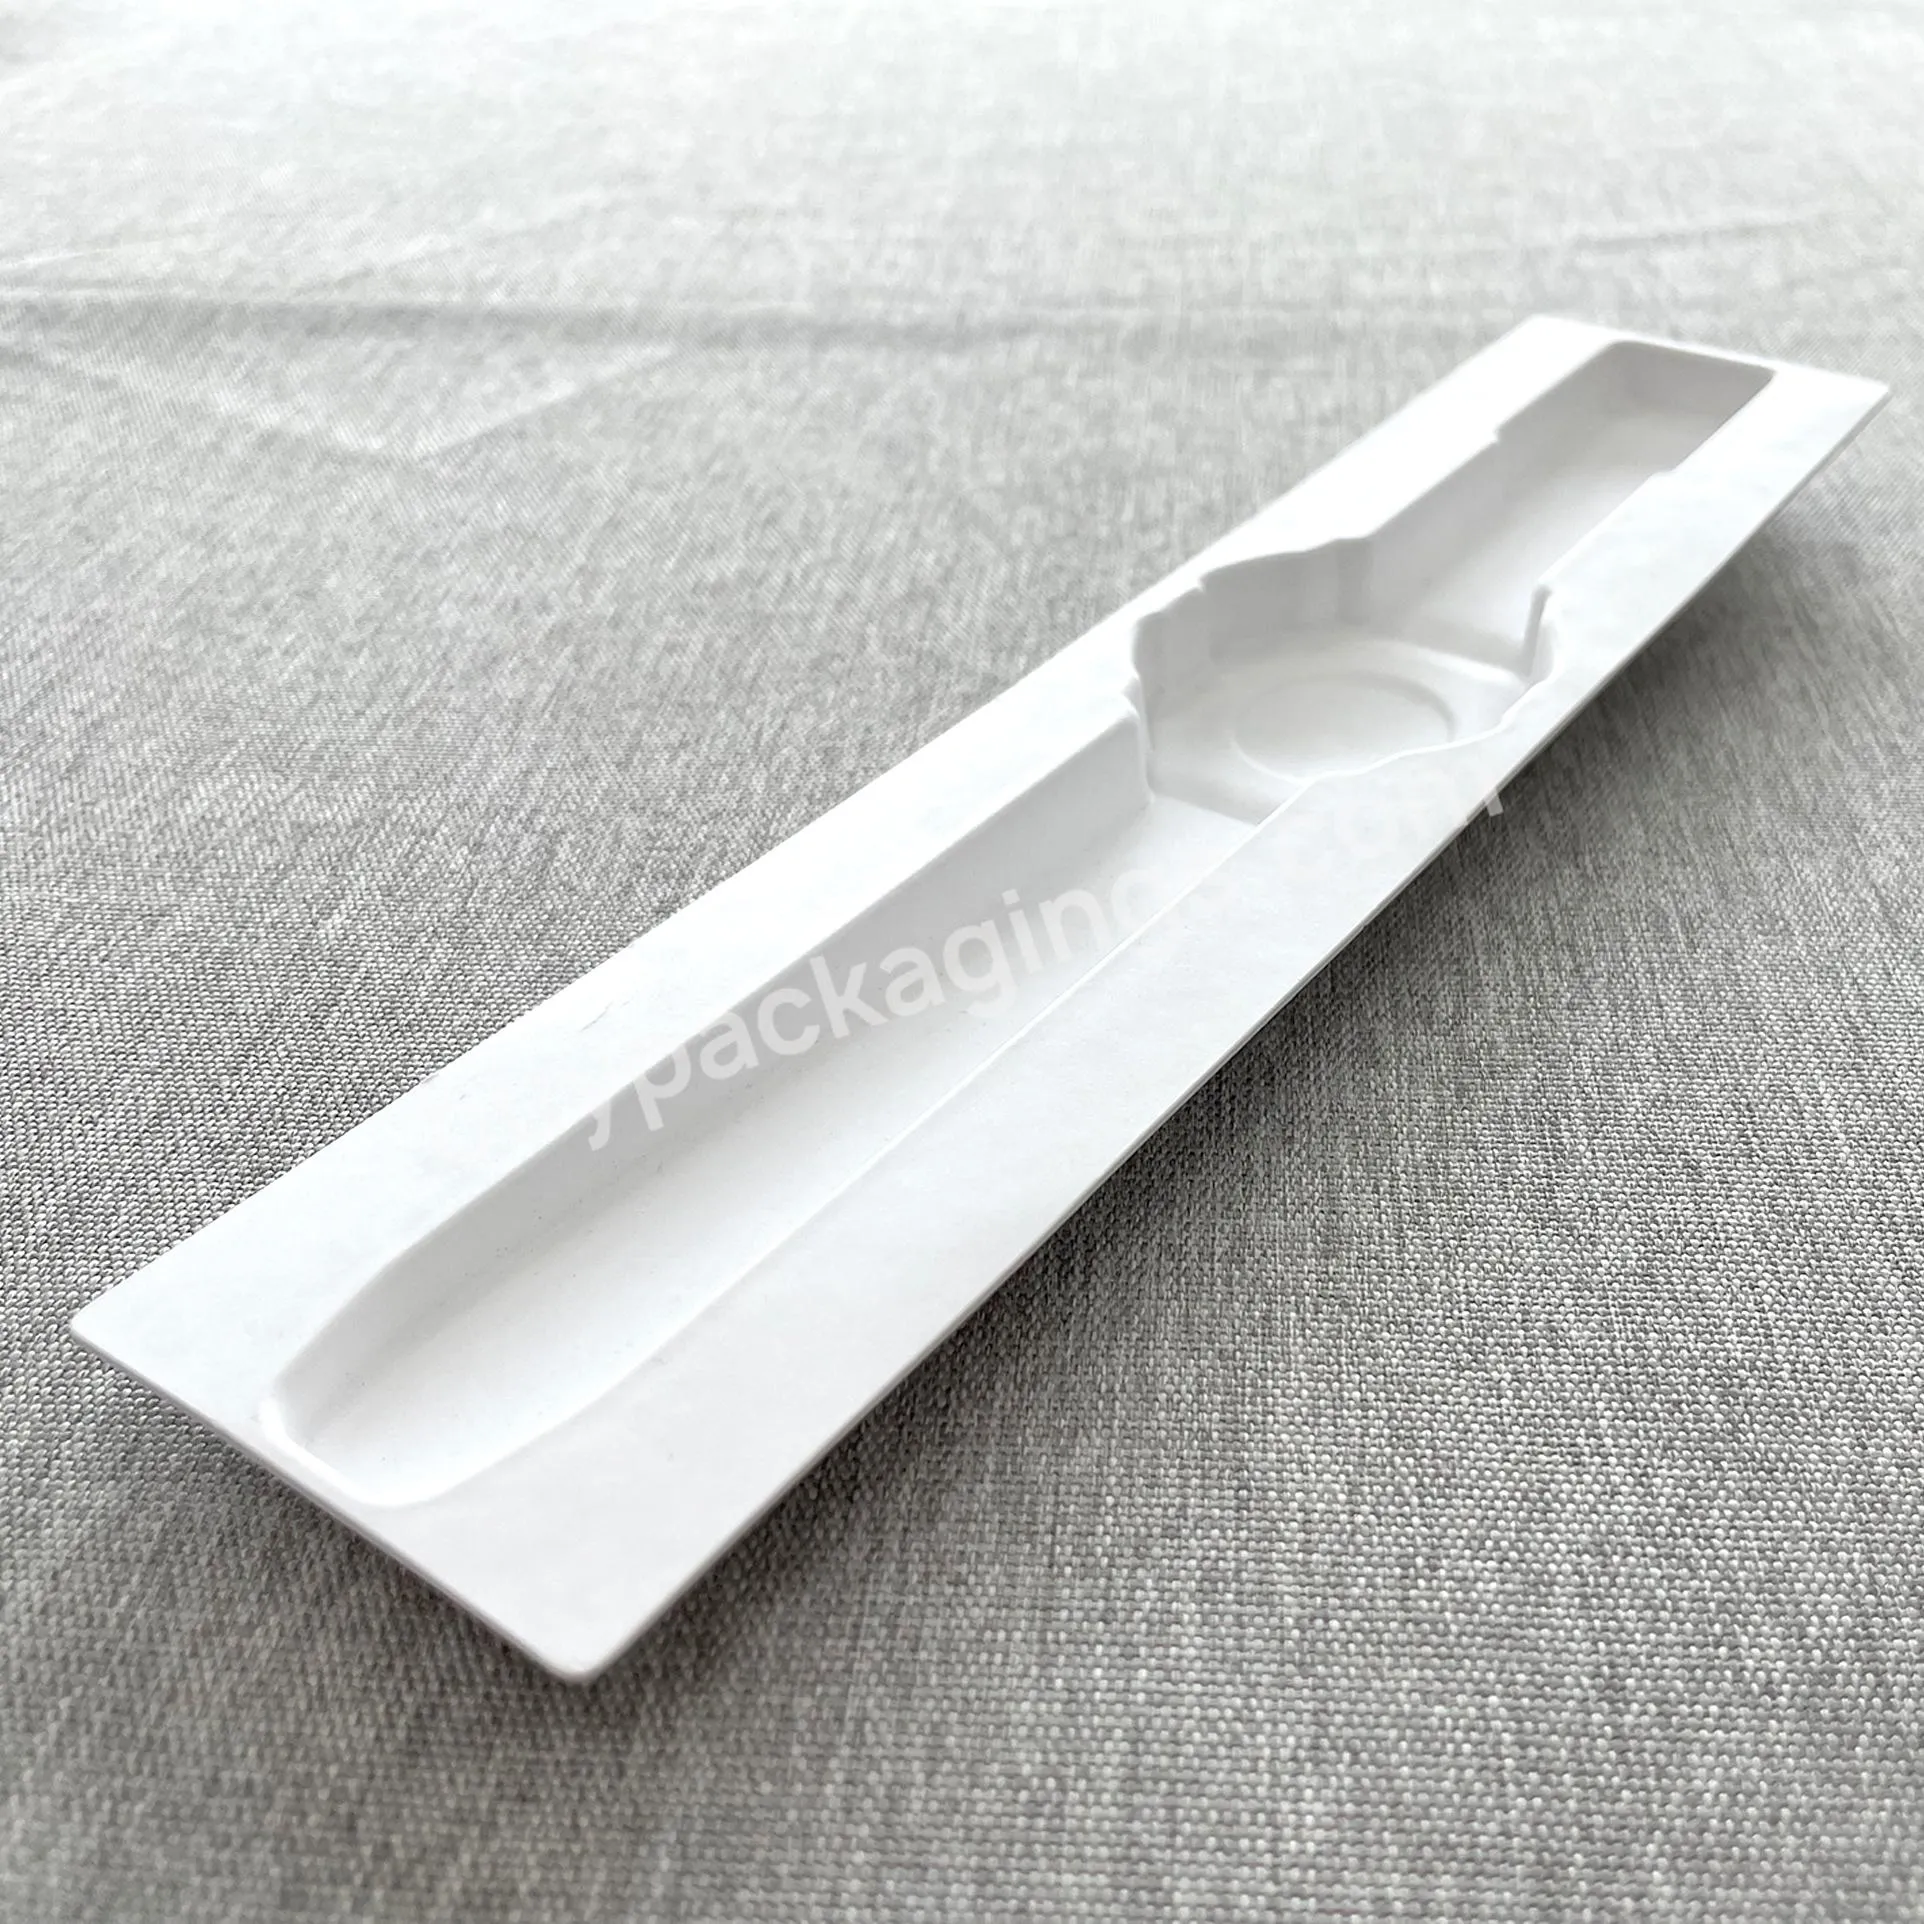 100% Biodegradable Recycled Popular Molded Pulp Insert Paper Pulp Tray Packing White Tray For Watch - Buy Recycled Paper Pulp Tray,Packing White Tray,Molded Pulp Insert Tray.